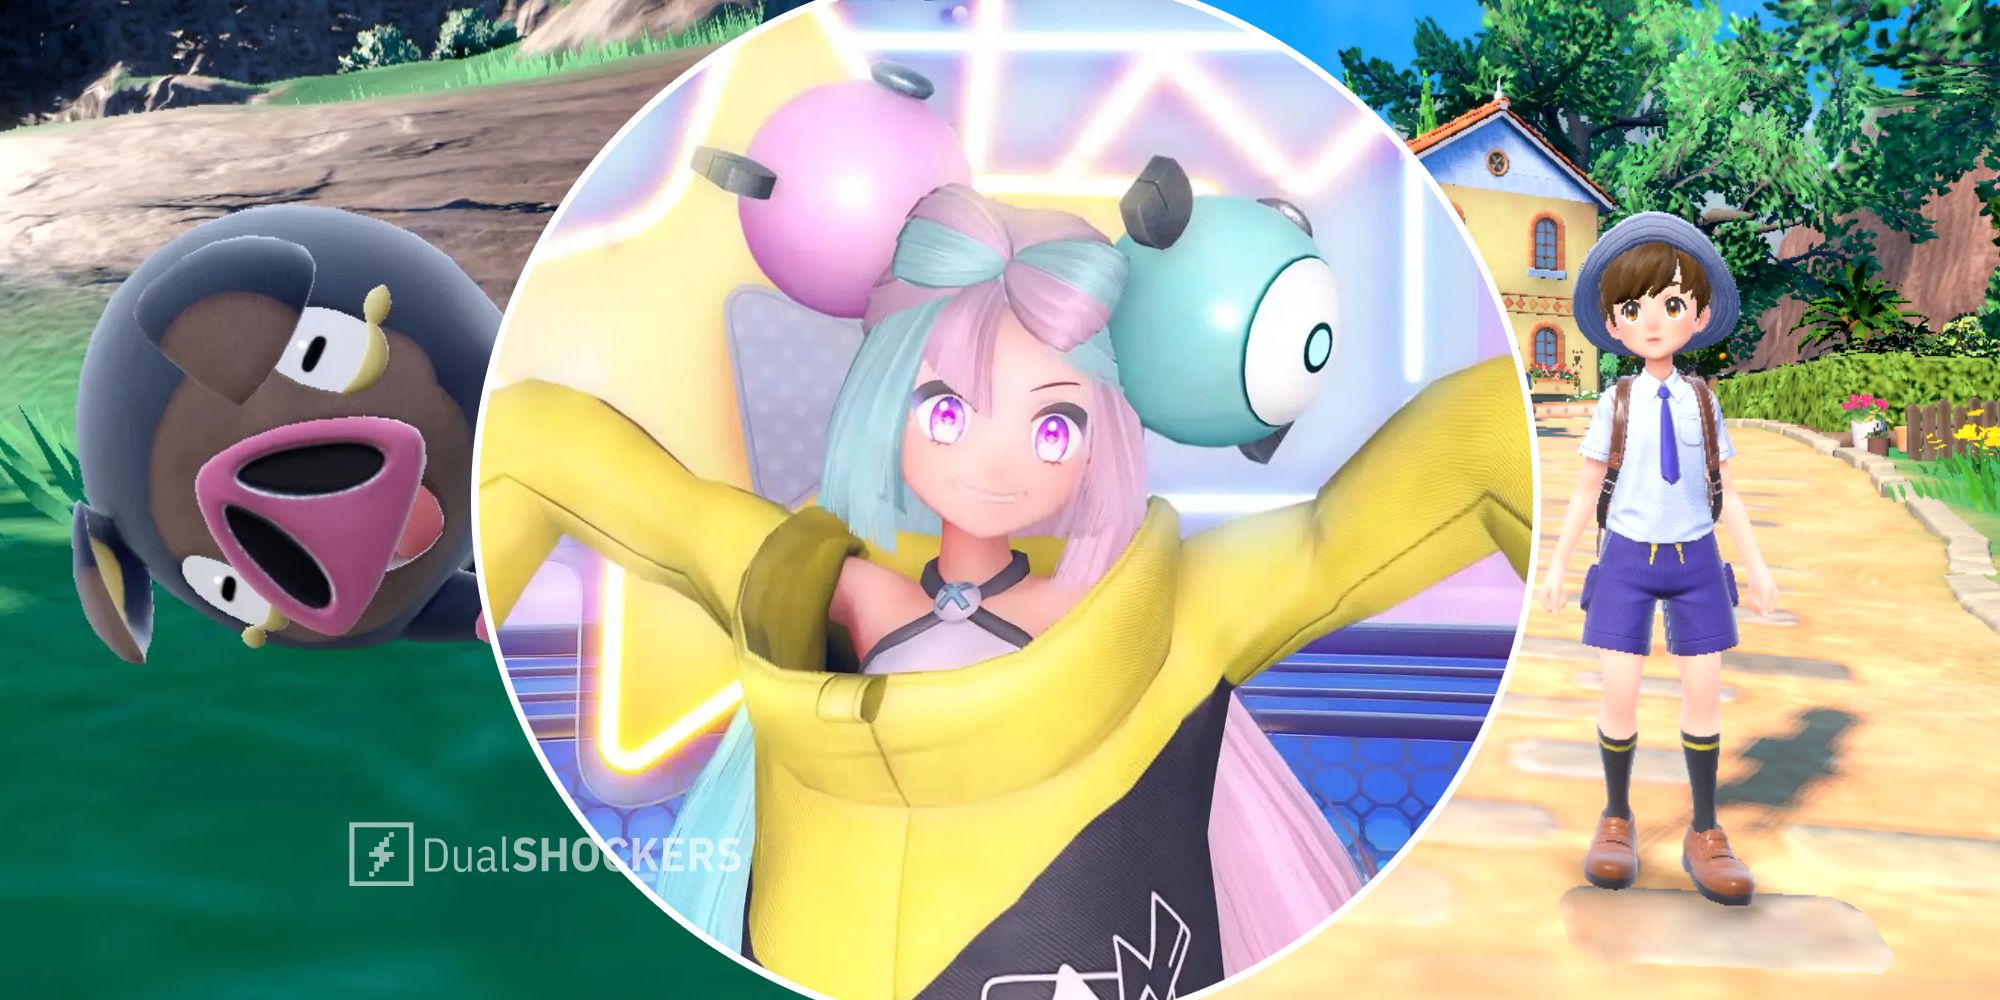 Meet Iono, Pokémon Scarlet and Violet's Electric-Type Gym Leader